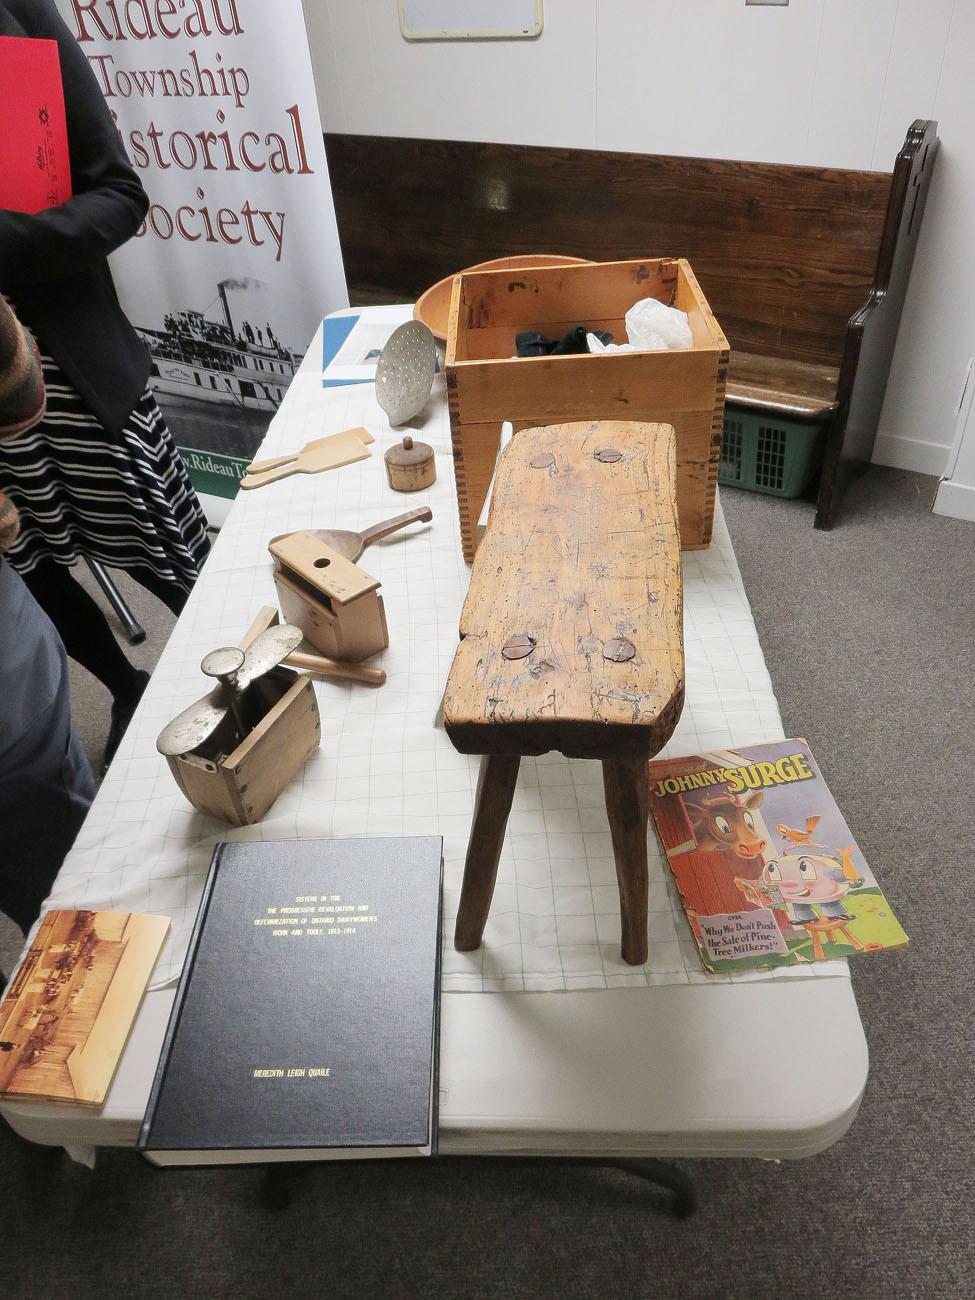 Meredith brought along a number of examples of tools and books used in dairy farming